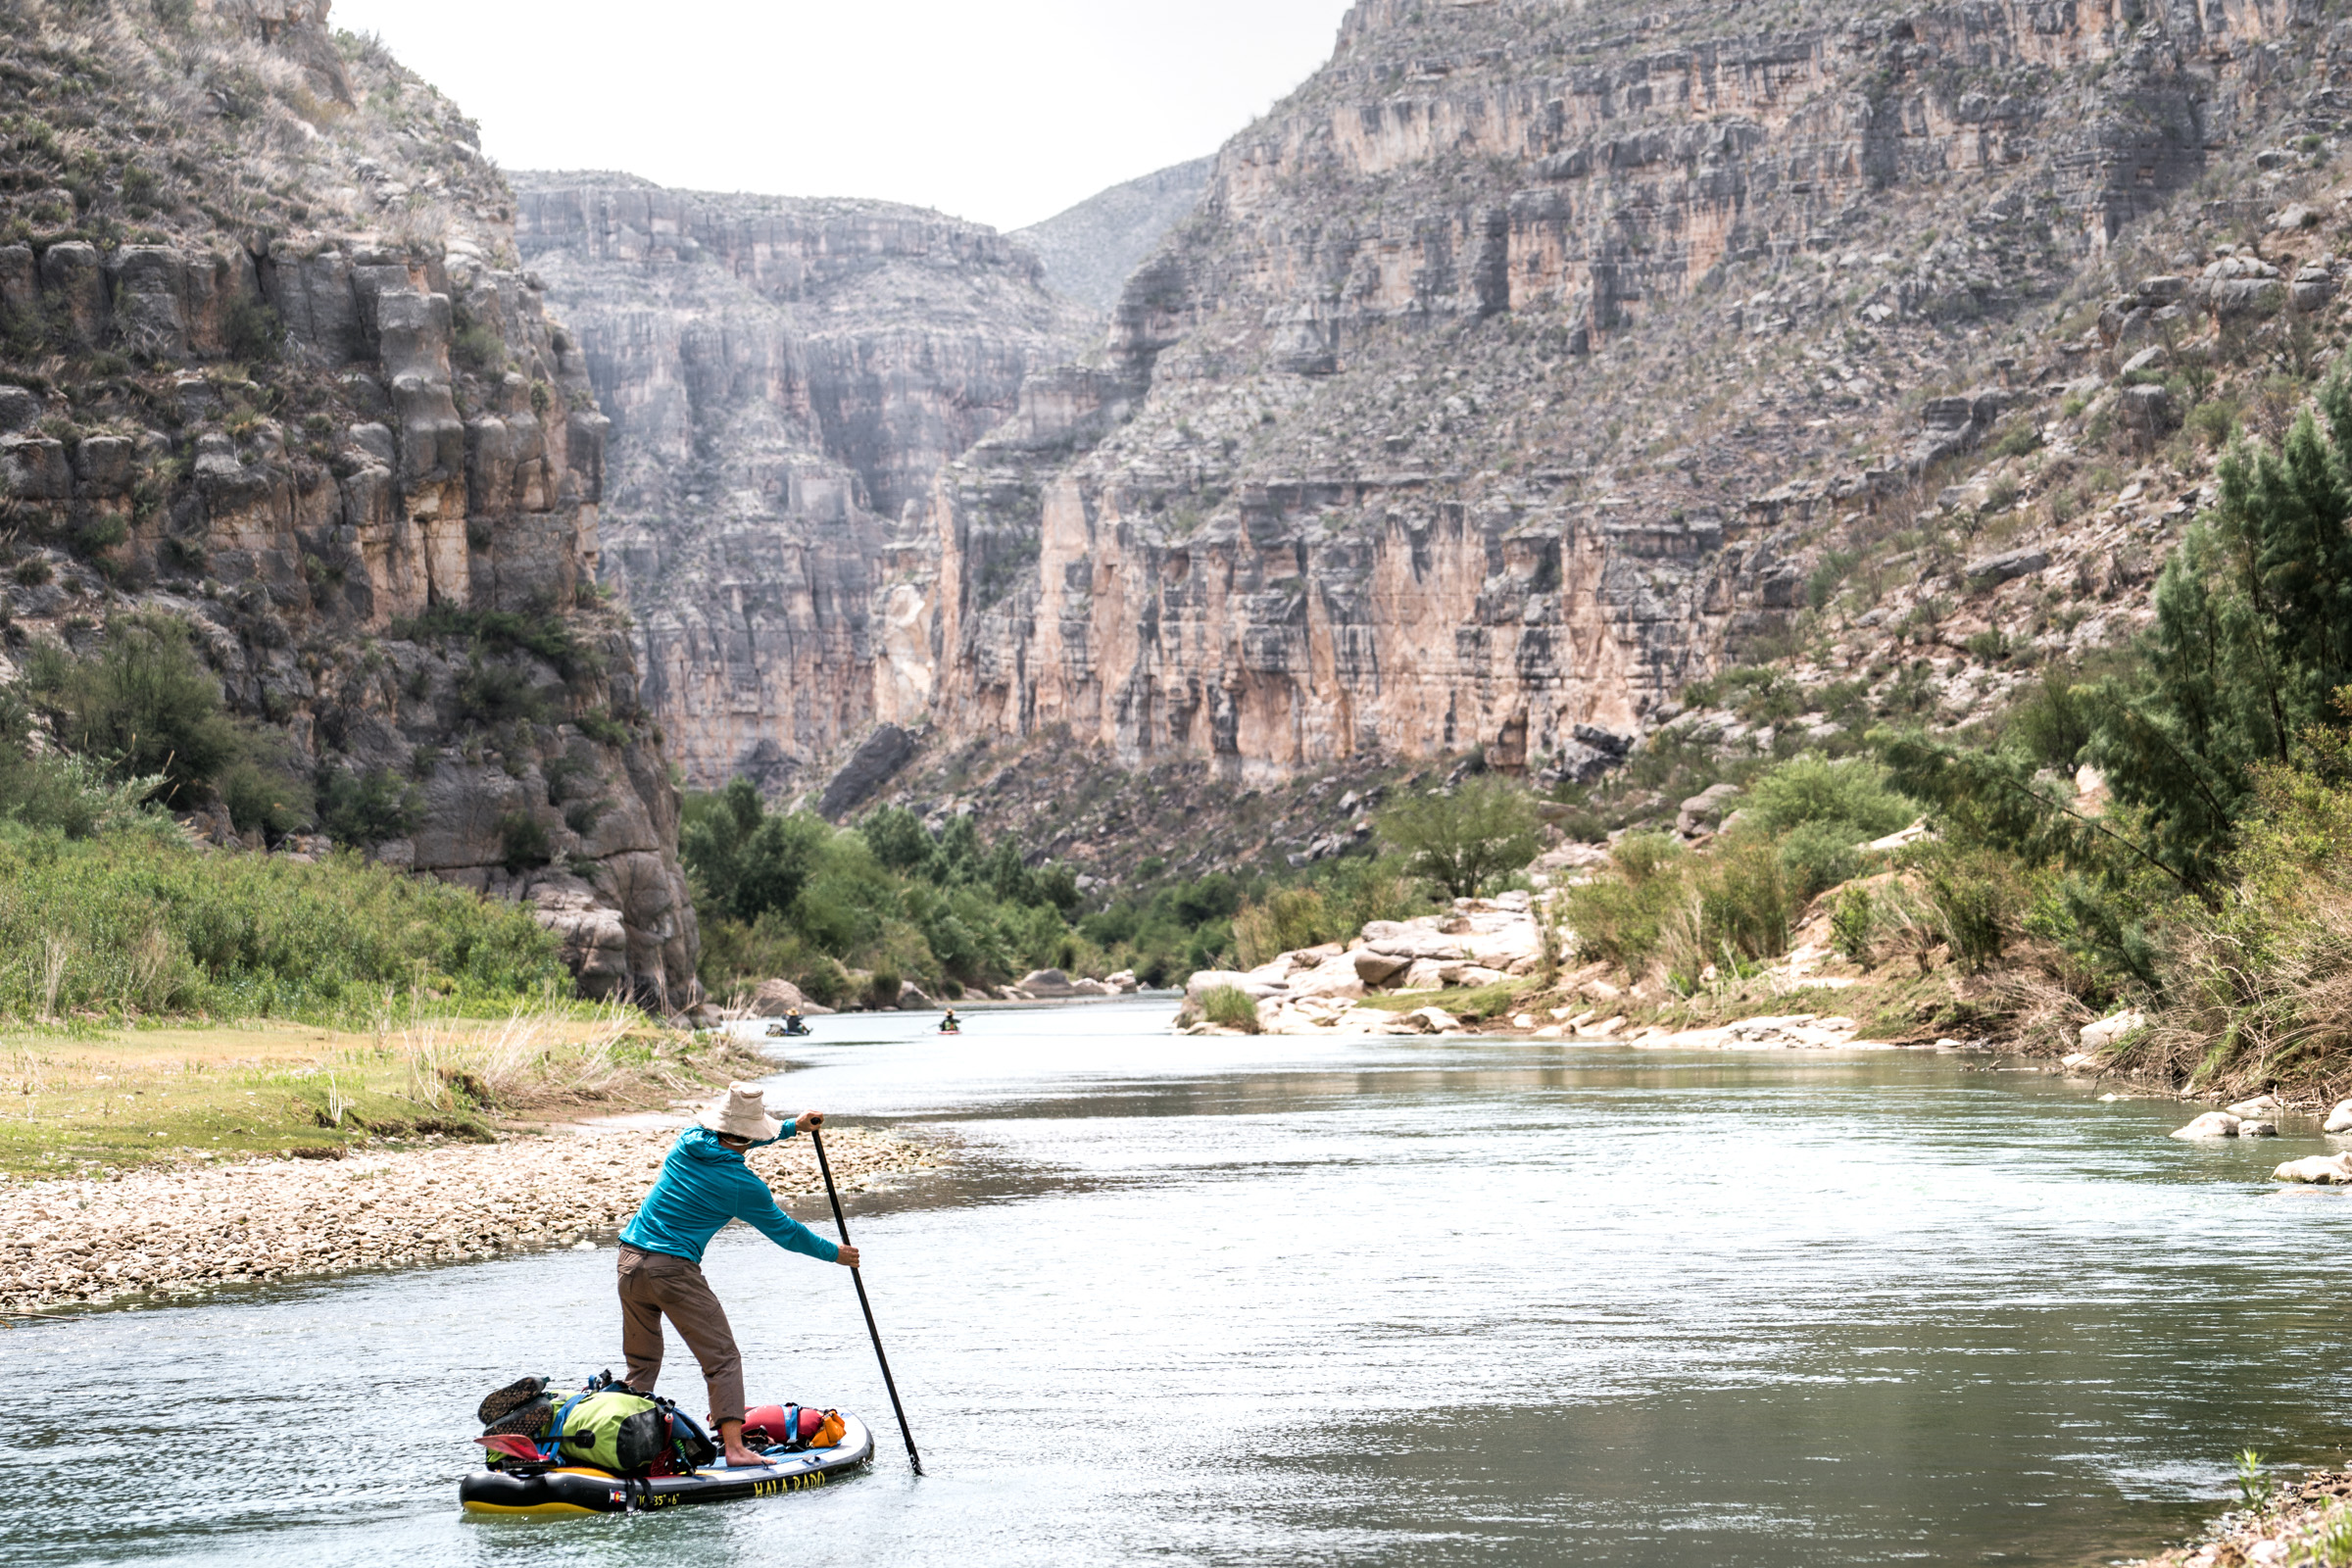 Pete paddles a Hala board into the gates of the Lower Canyons